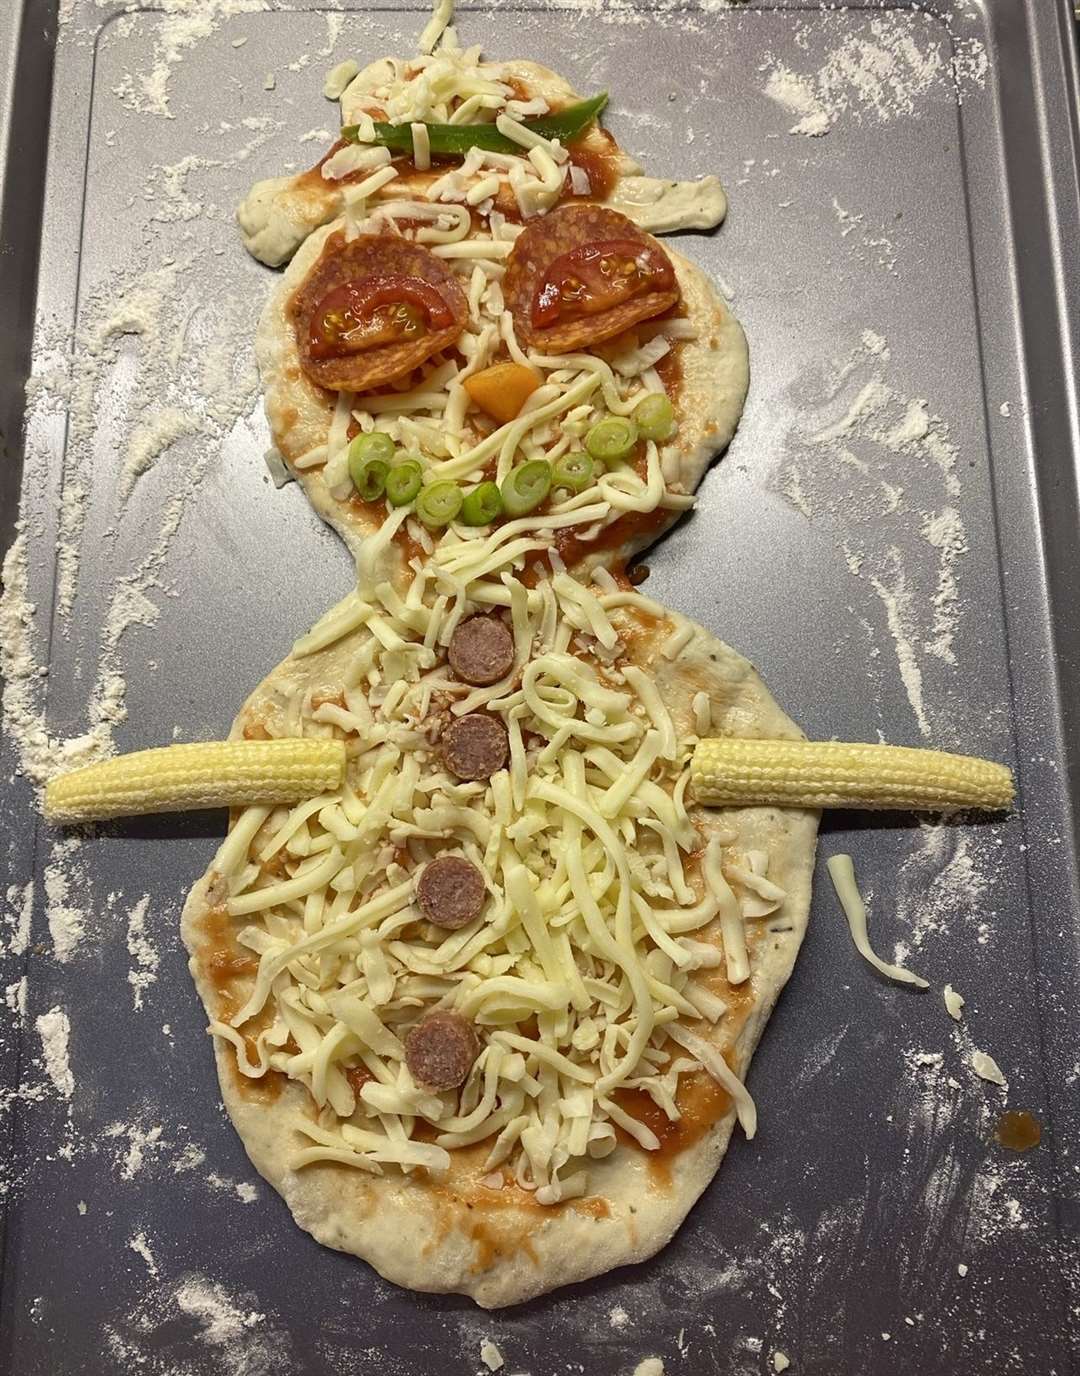 The children produced a wide range of creative pizza designs